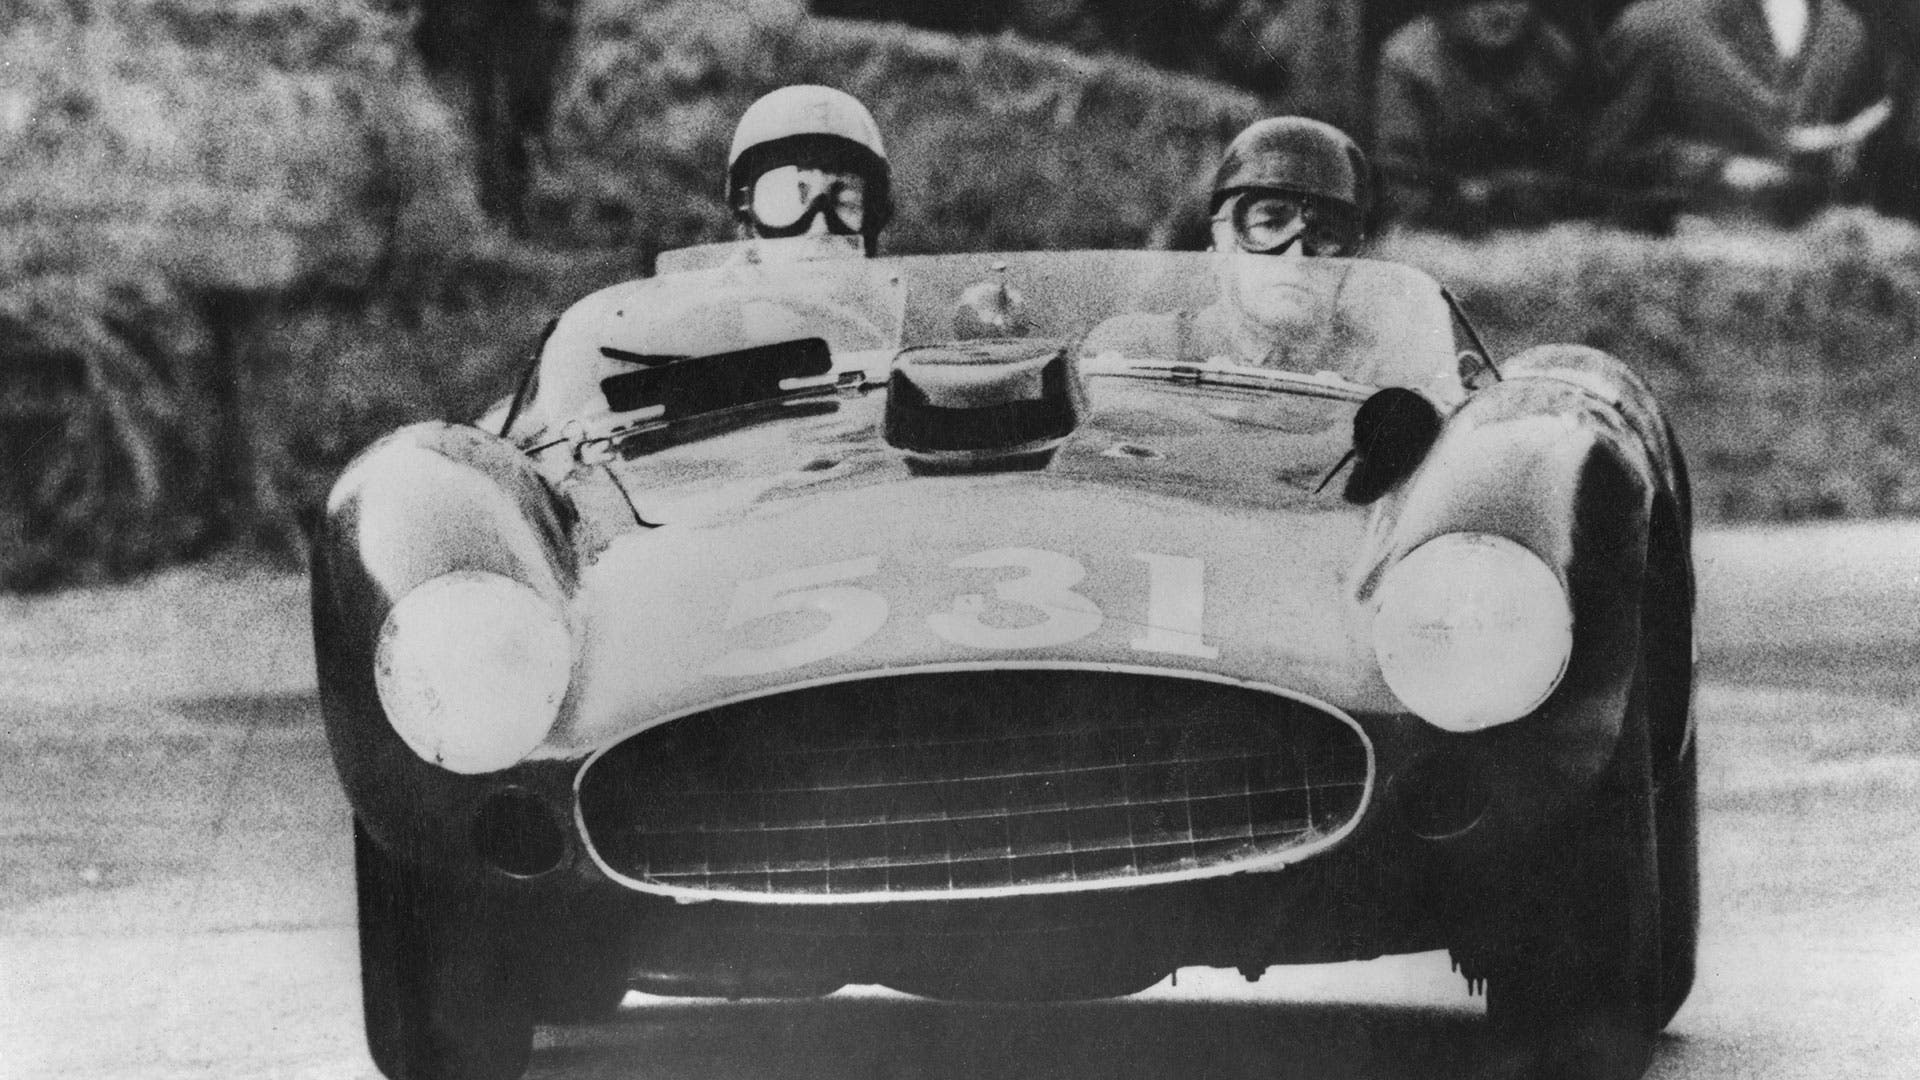 Alfonso de Portago, the Marquis of Portago (1928 - 1957) and his co-driver Edmund Nelson in their Ferrari at Peschiera in Italy during the Italian Mille Miglia road race, 12th May 1957.